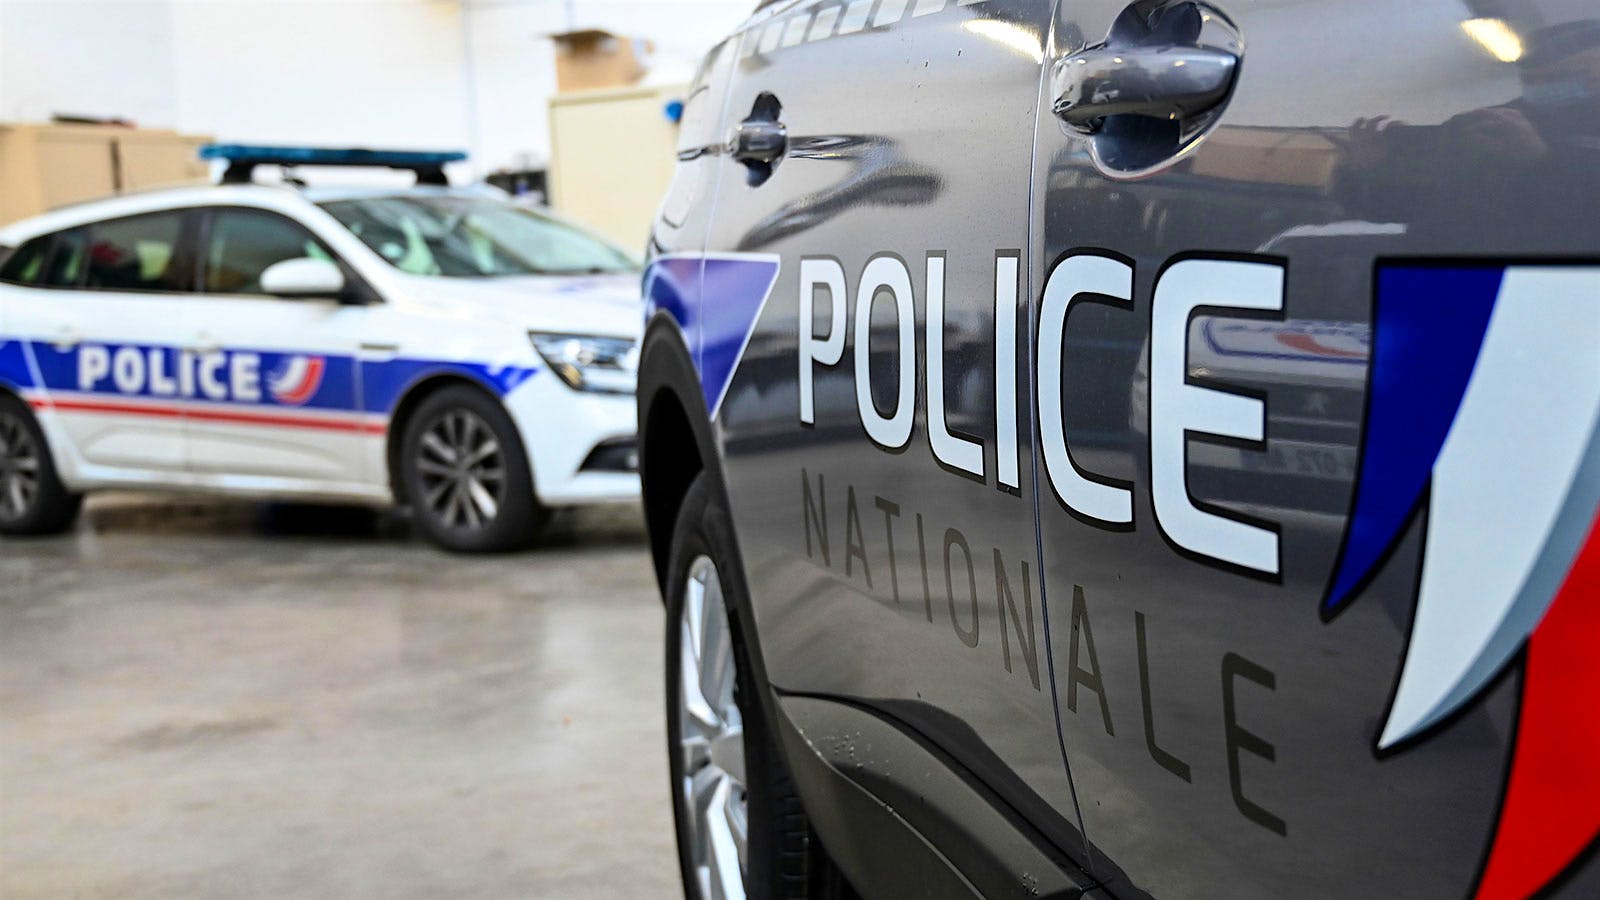 Police nationale